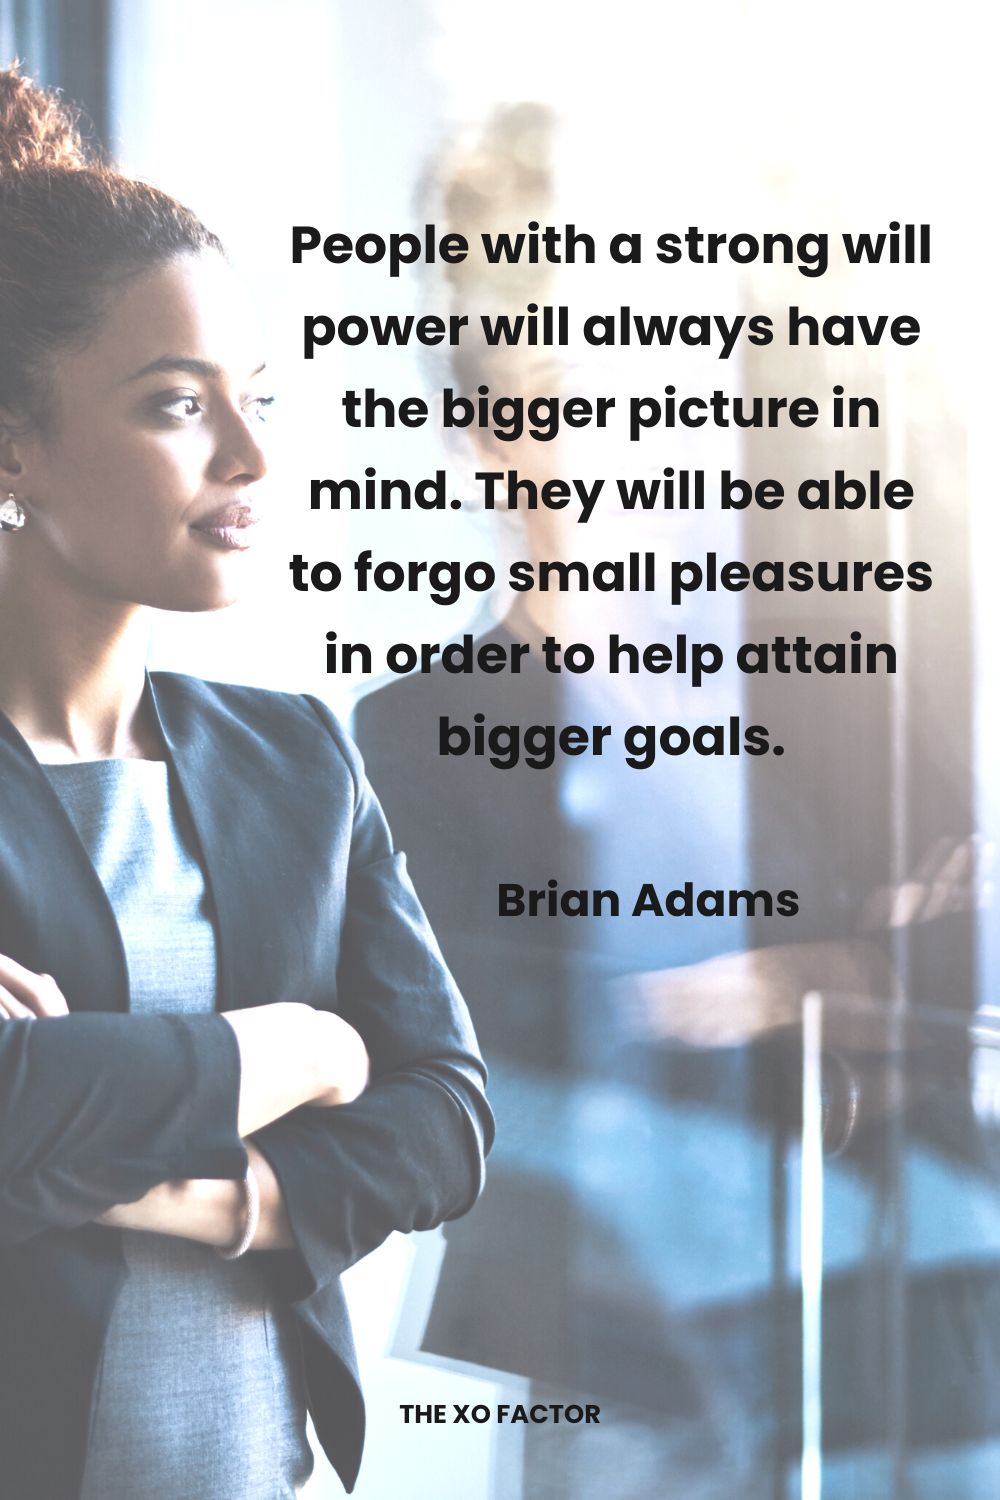 People with a strong will power will always have the bigger picture in mind. They will be able to forgo small pleasures in order to help attain bigger goals. Brian Adams,